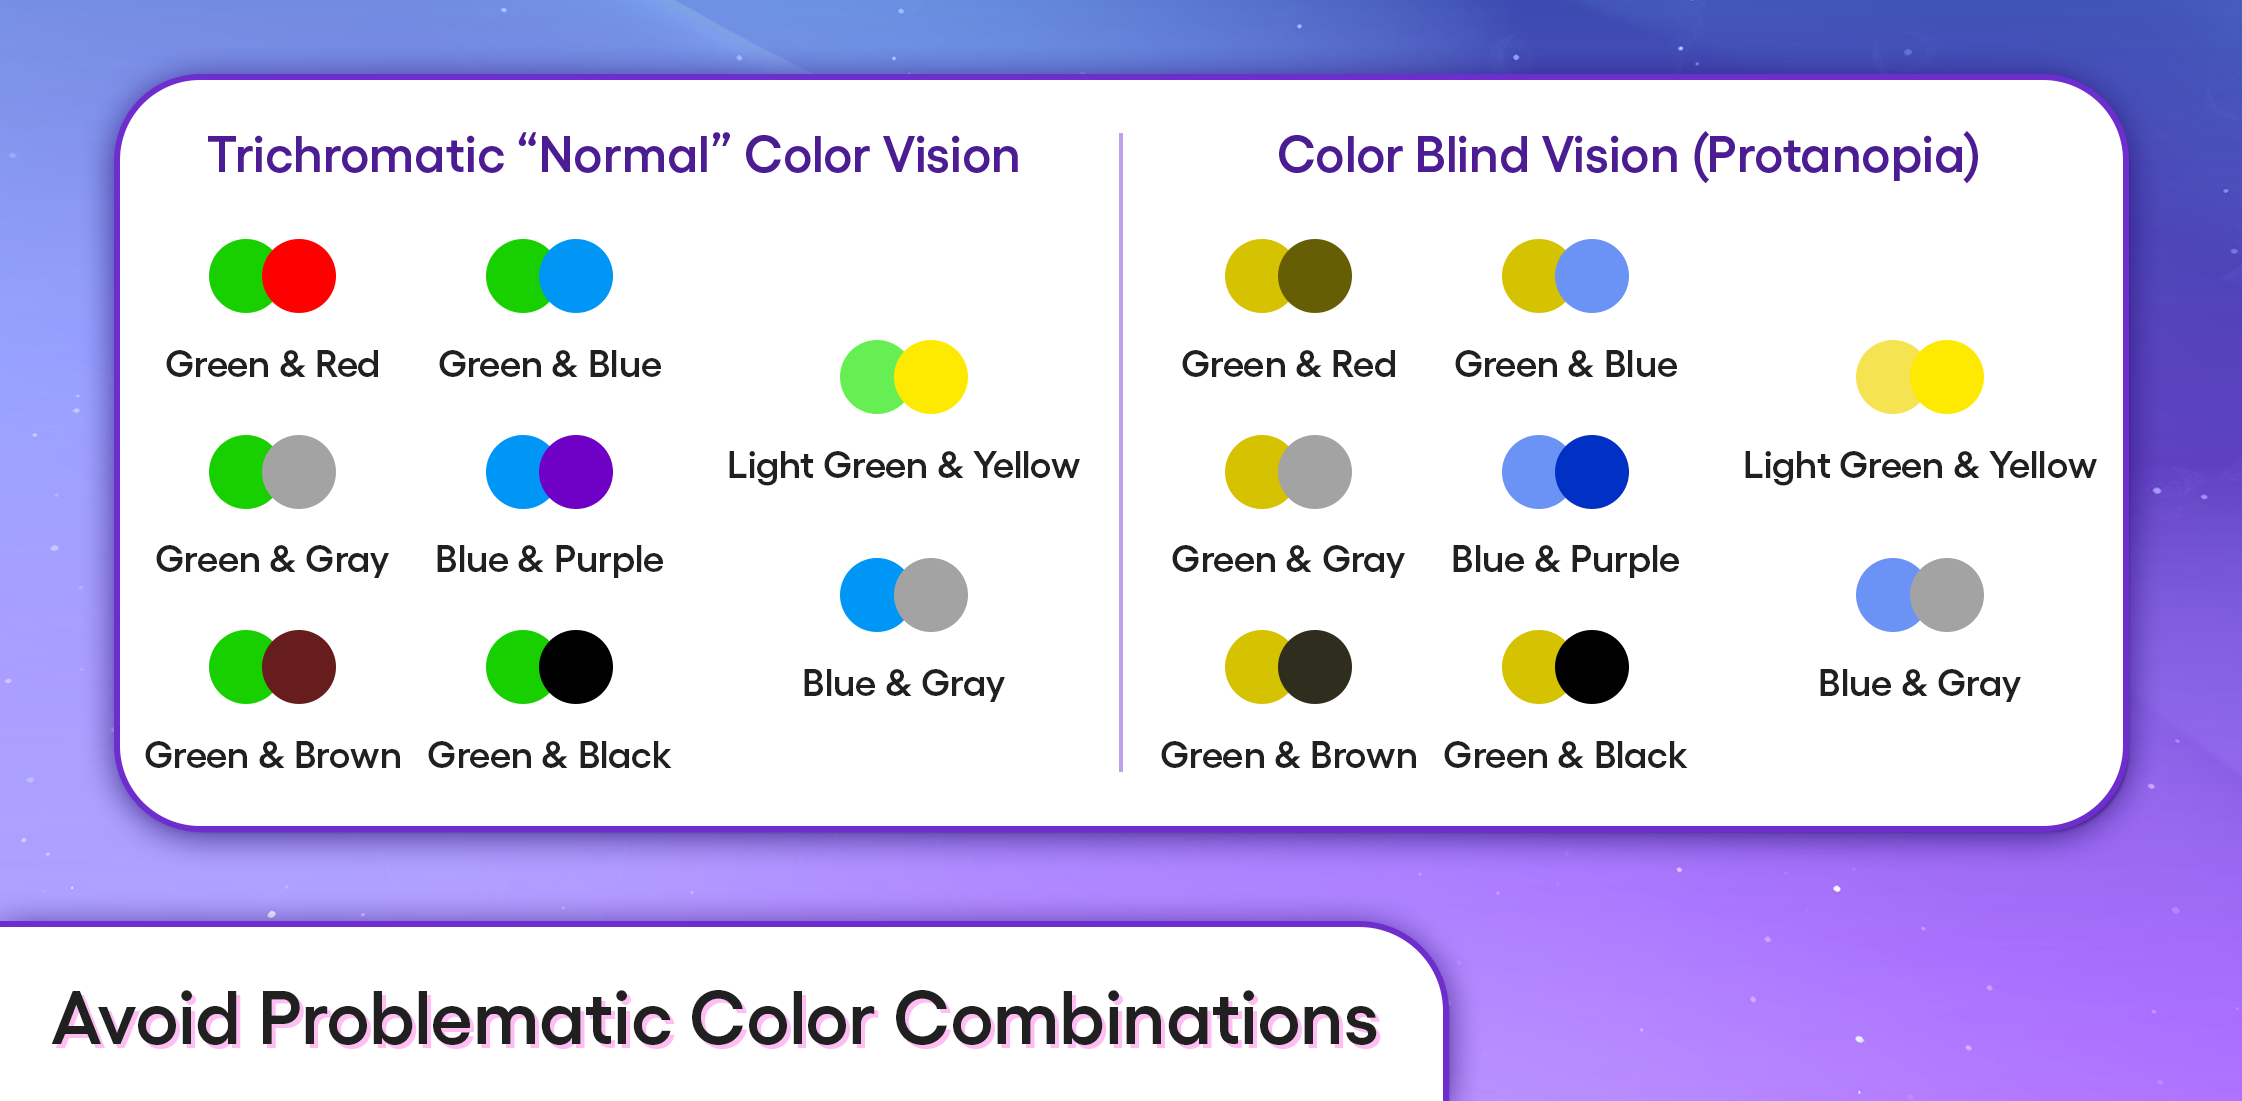 Avoid Problematic Color Combinations